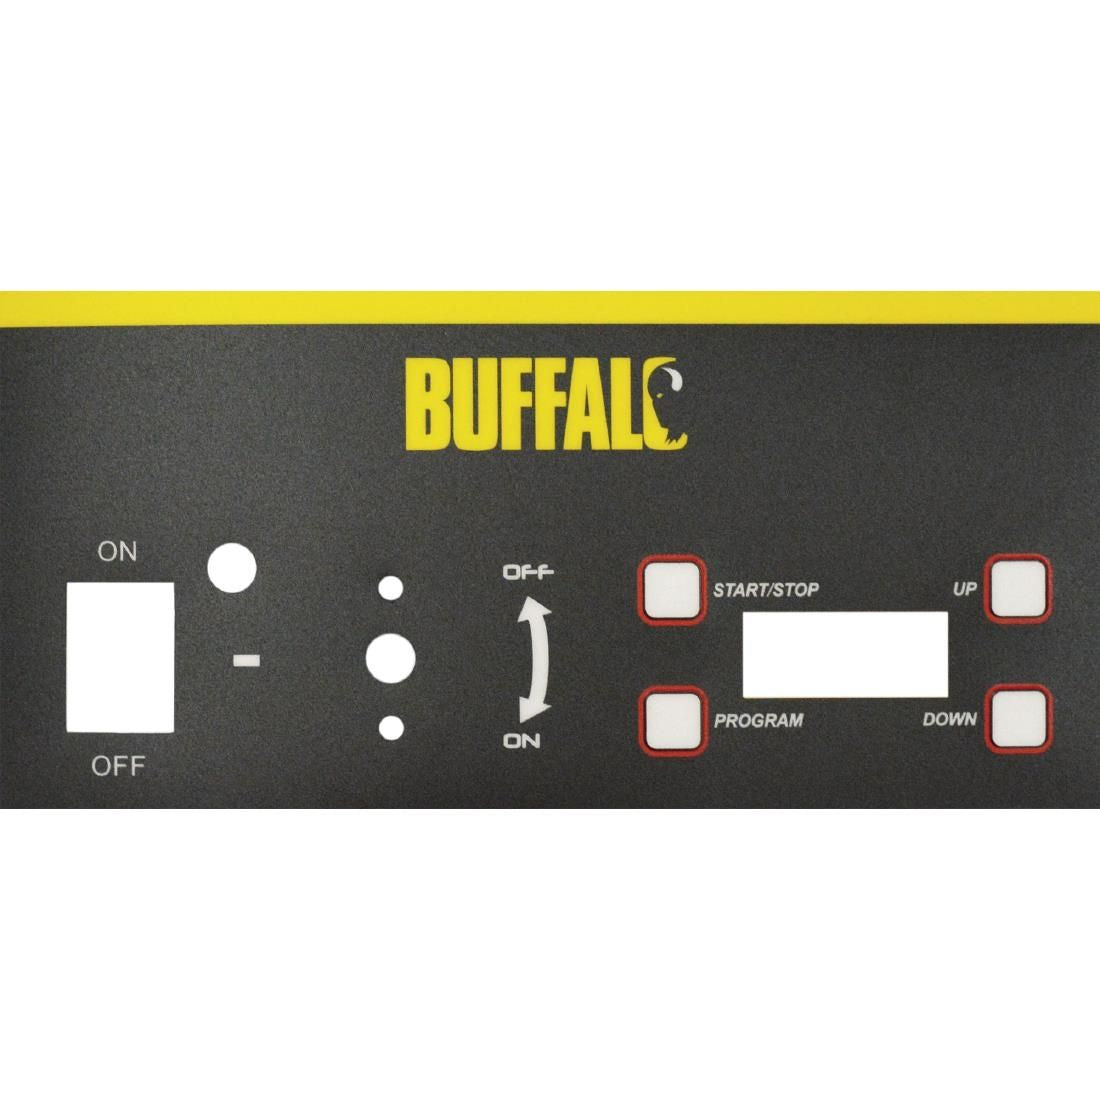 Buffalo Decal Sticker AF490 JD Catering Equipment Solutions Ltd